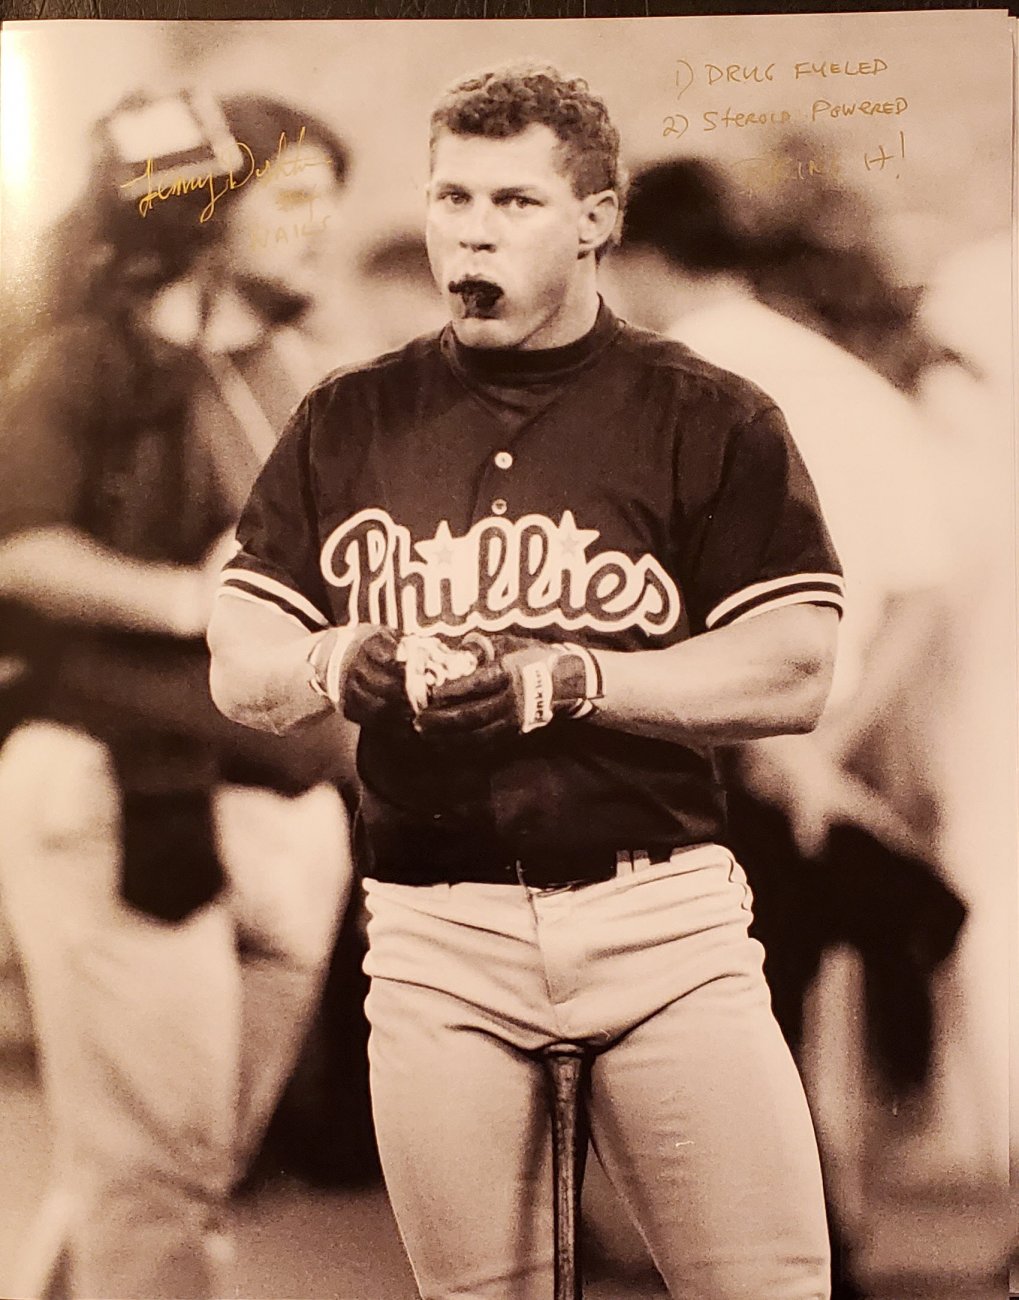 Lenny Dykstra 1986 Mets World Series Champ and Philadelphia Philly